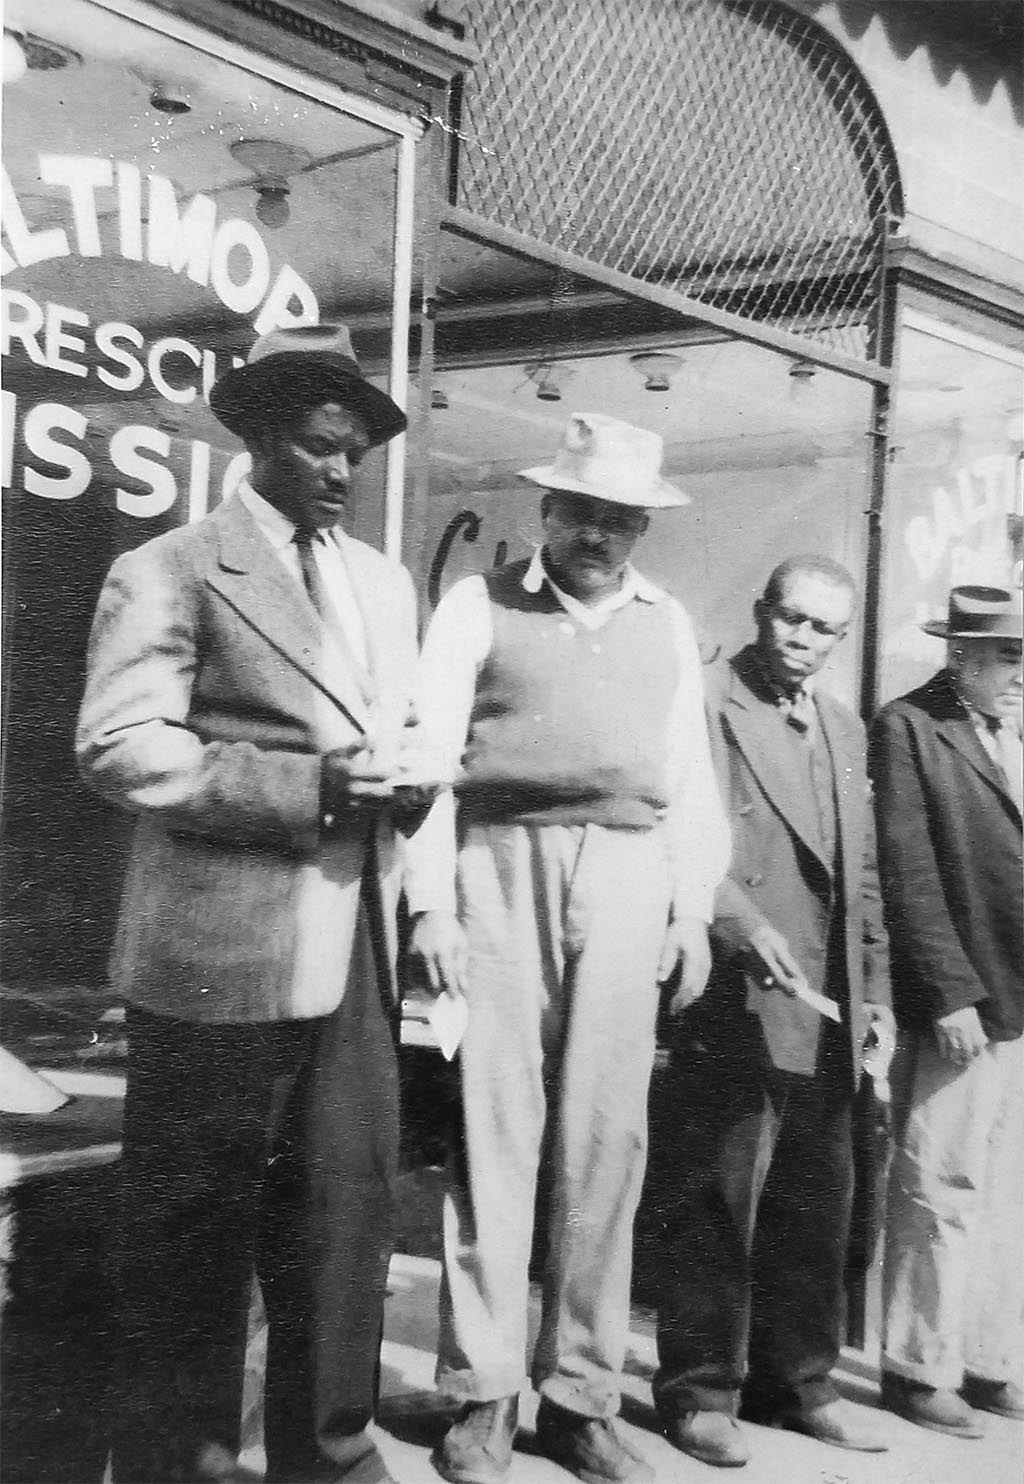 A group of men outside the Baltimore Rescue Mission, circa 1956